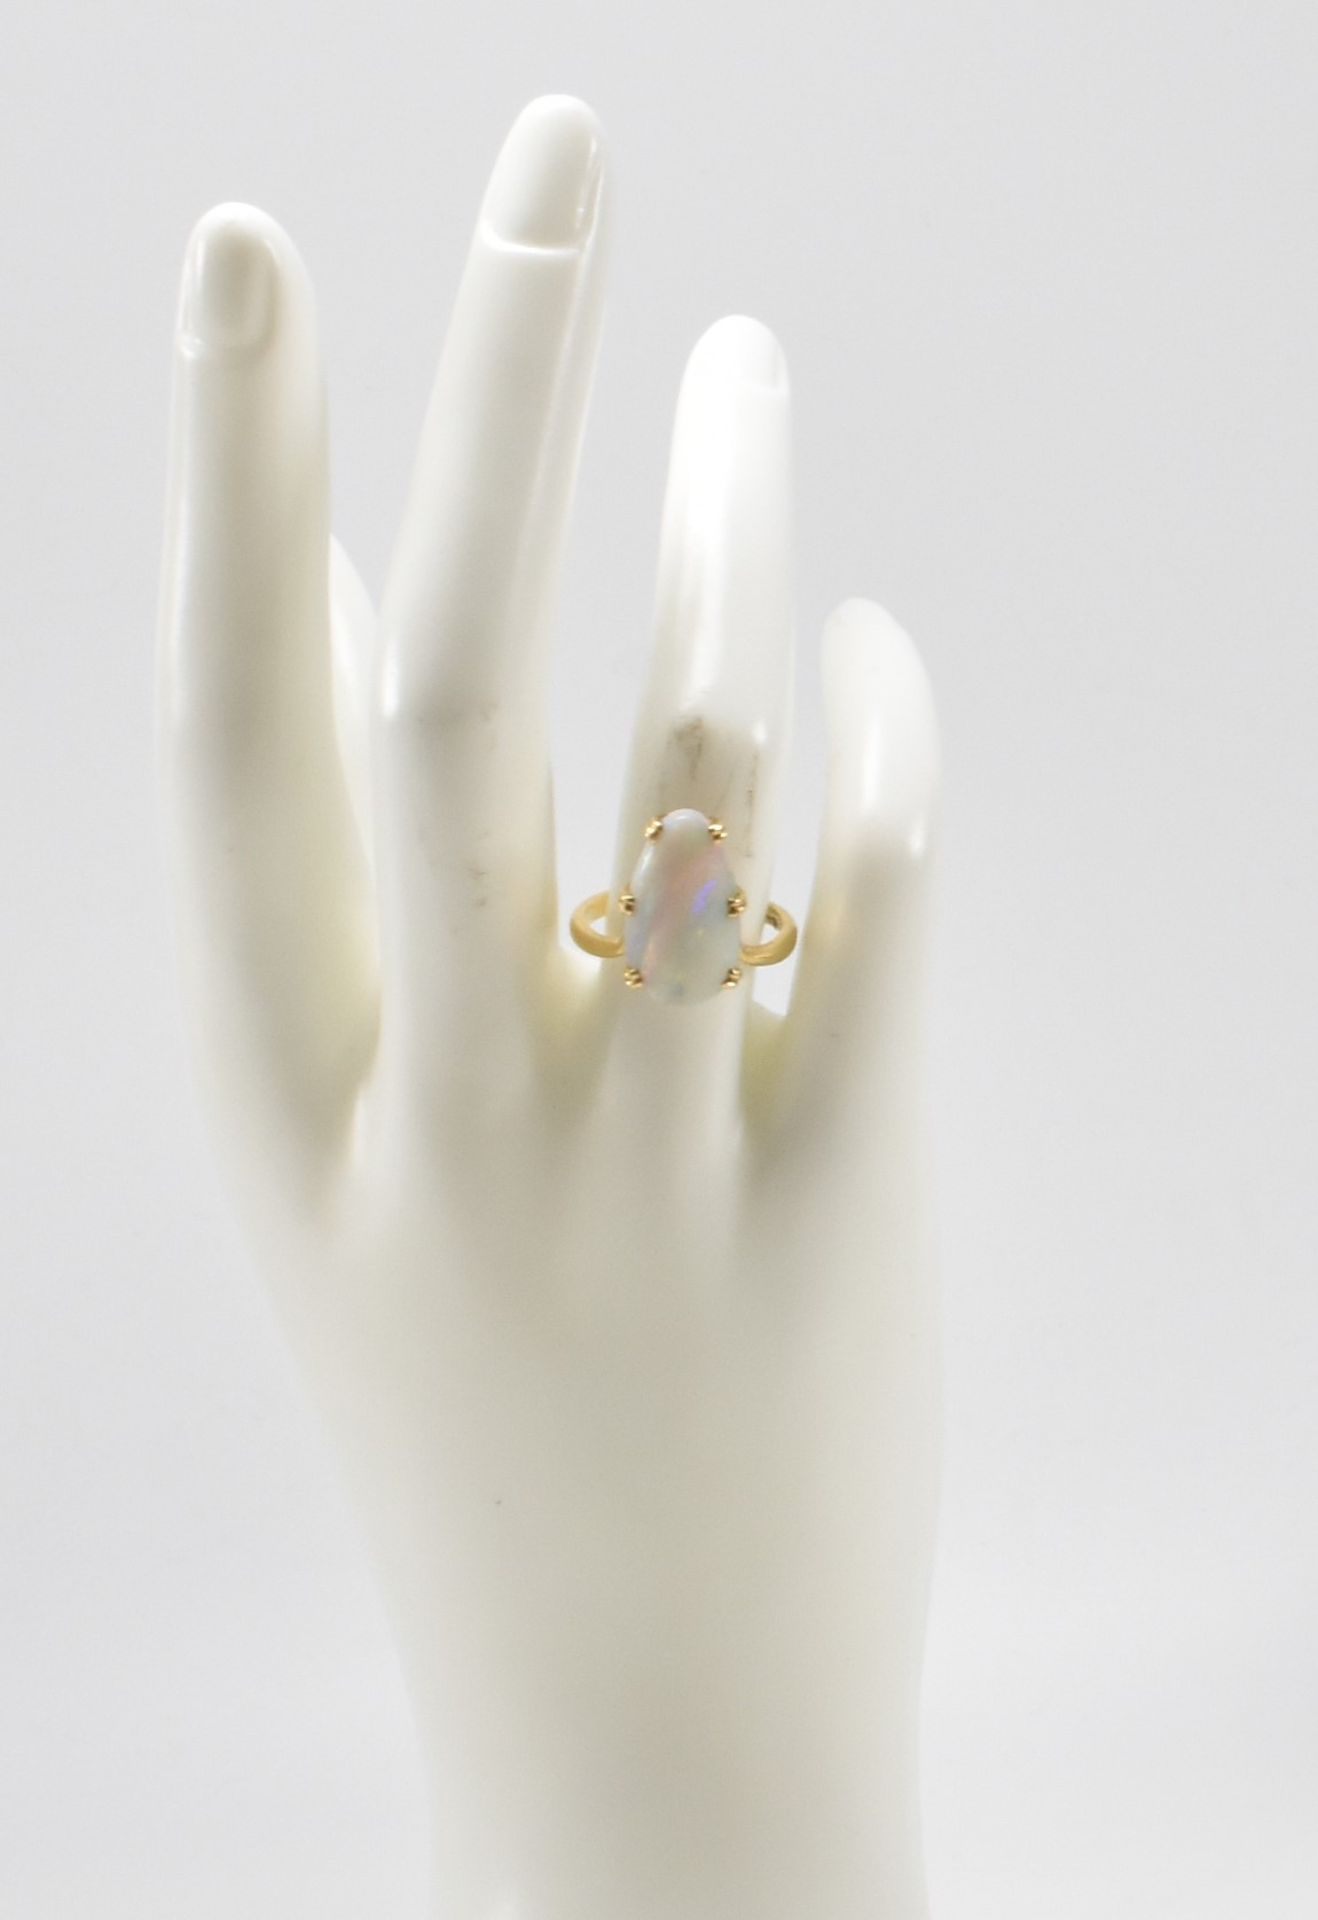 VINTAGE HALLMARKED 18CT GOLD & OPAL DRESS RING - Image 11 of 11